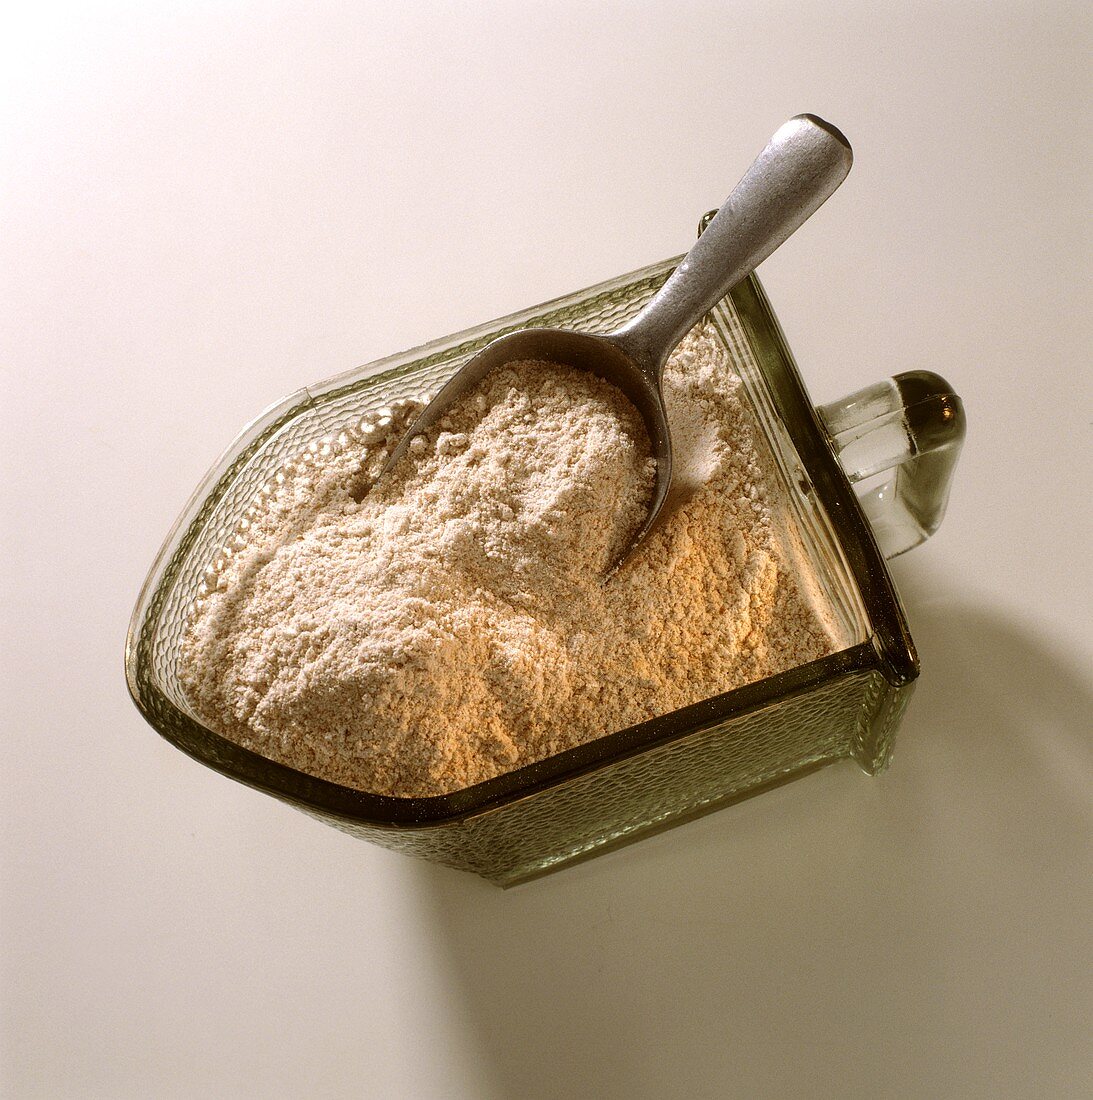 Wholemeal flour in glass container with small scoop